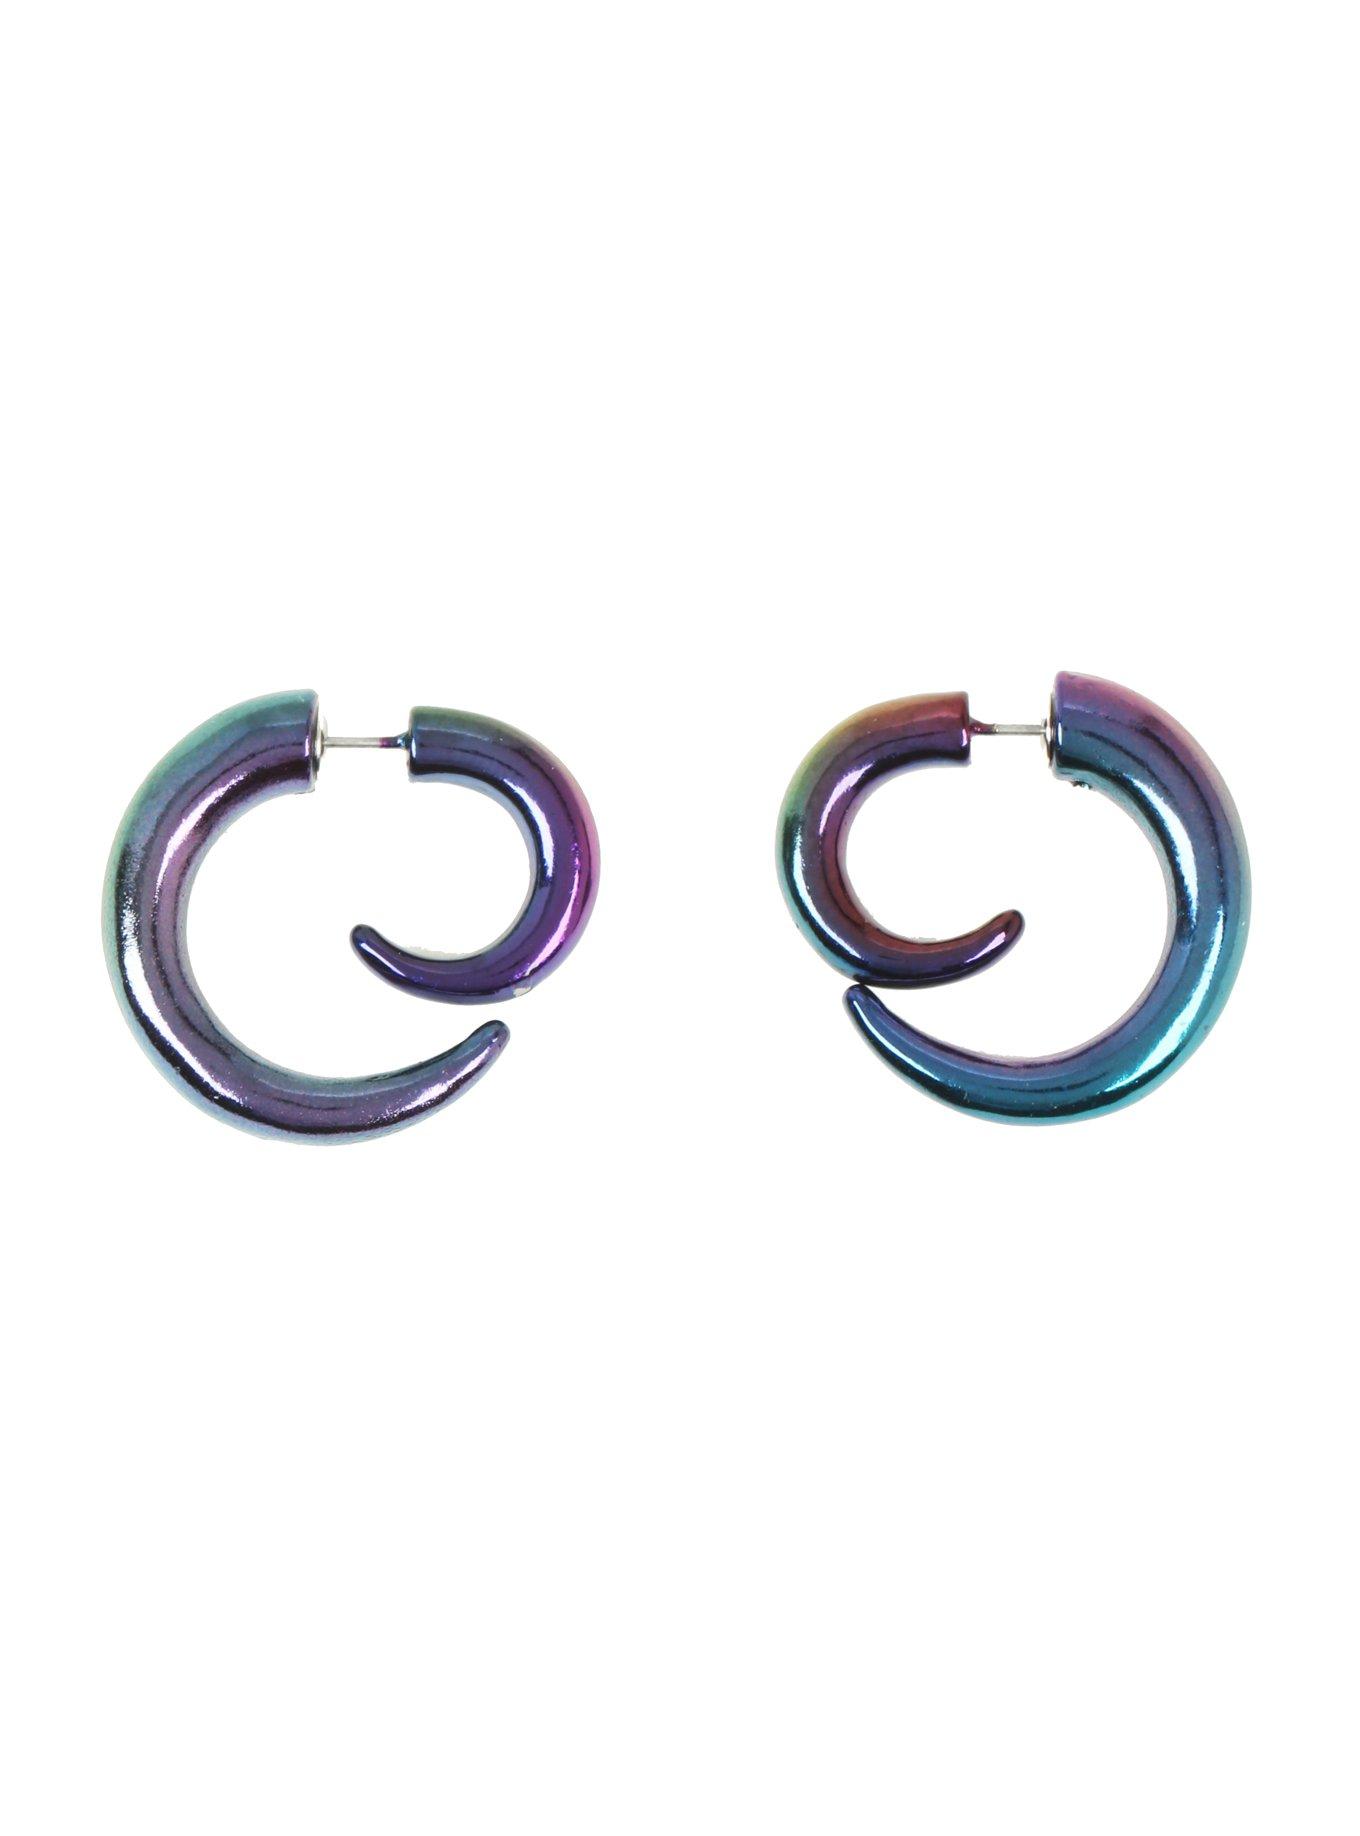 Blackheart Anodized Curved Tunnel 2 Pack, , hi-res